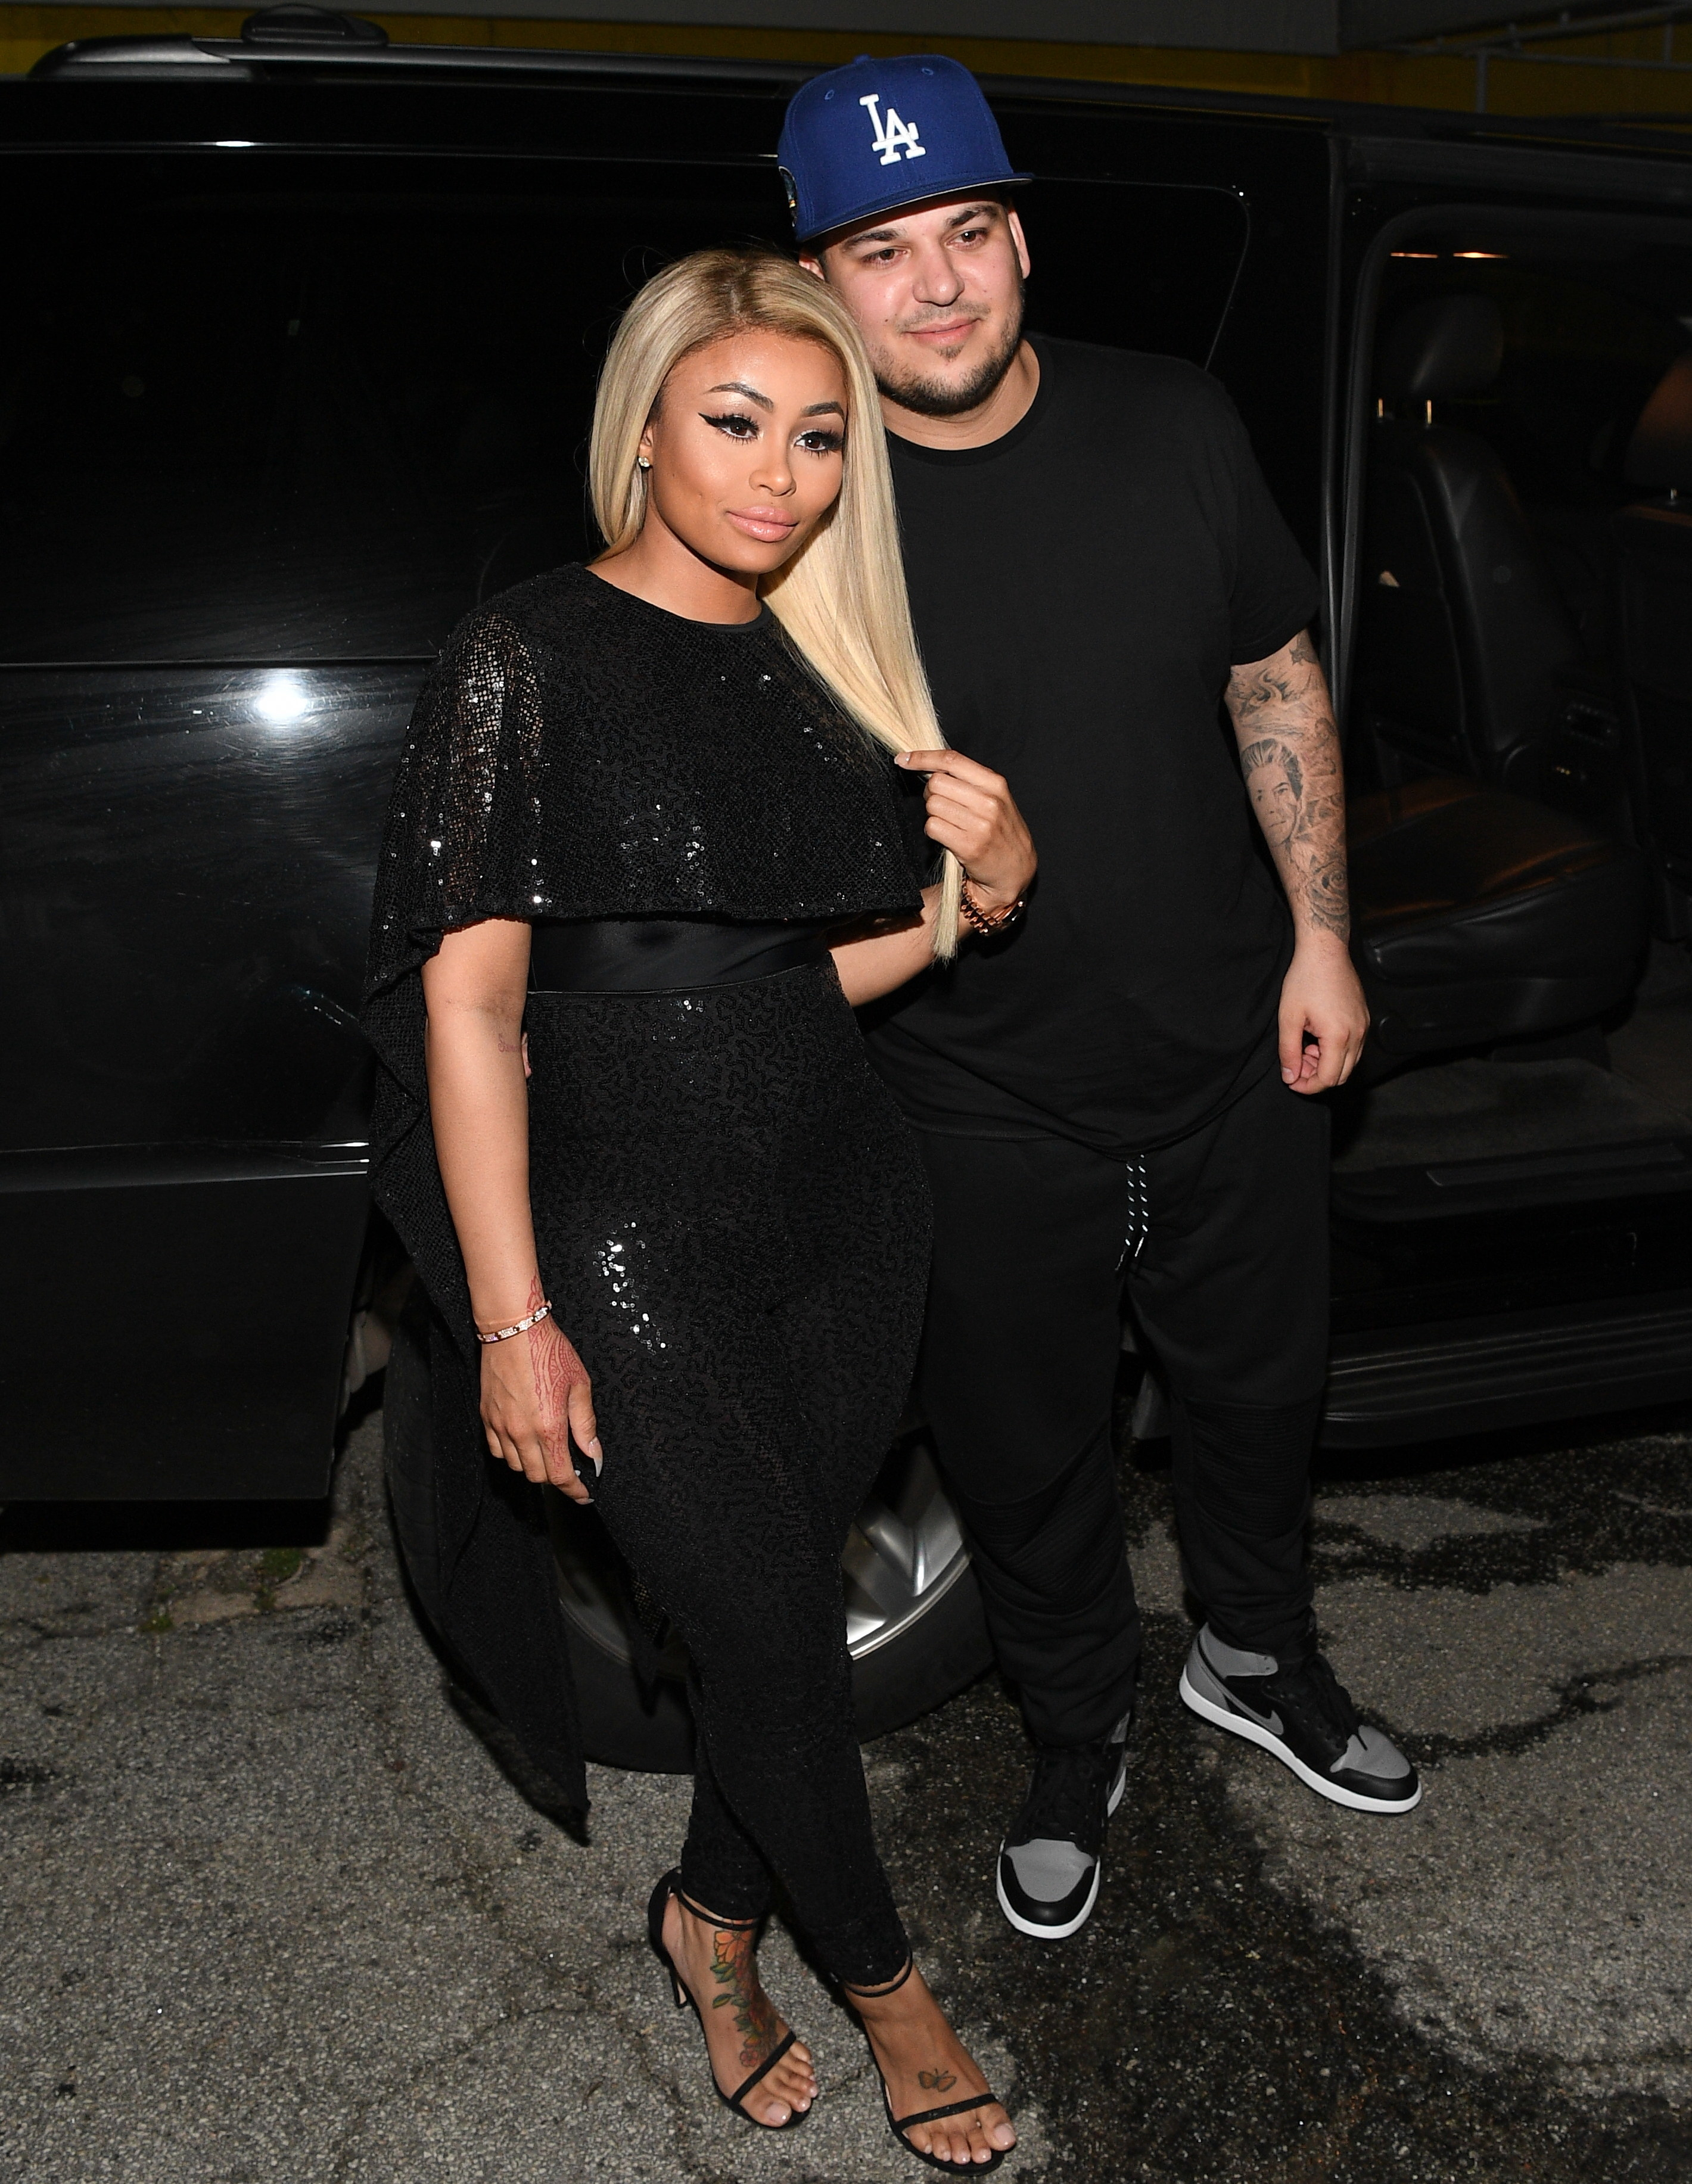 Blac Chyna and Rob Kardashian exiting a car and posing for paparazzi